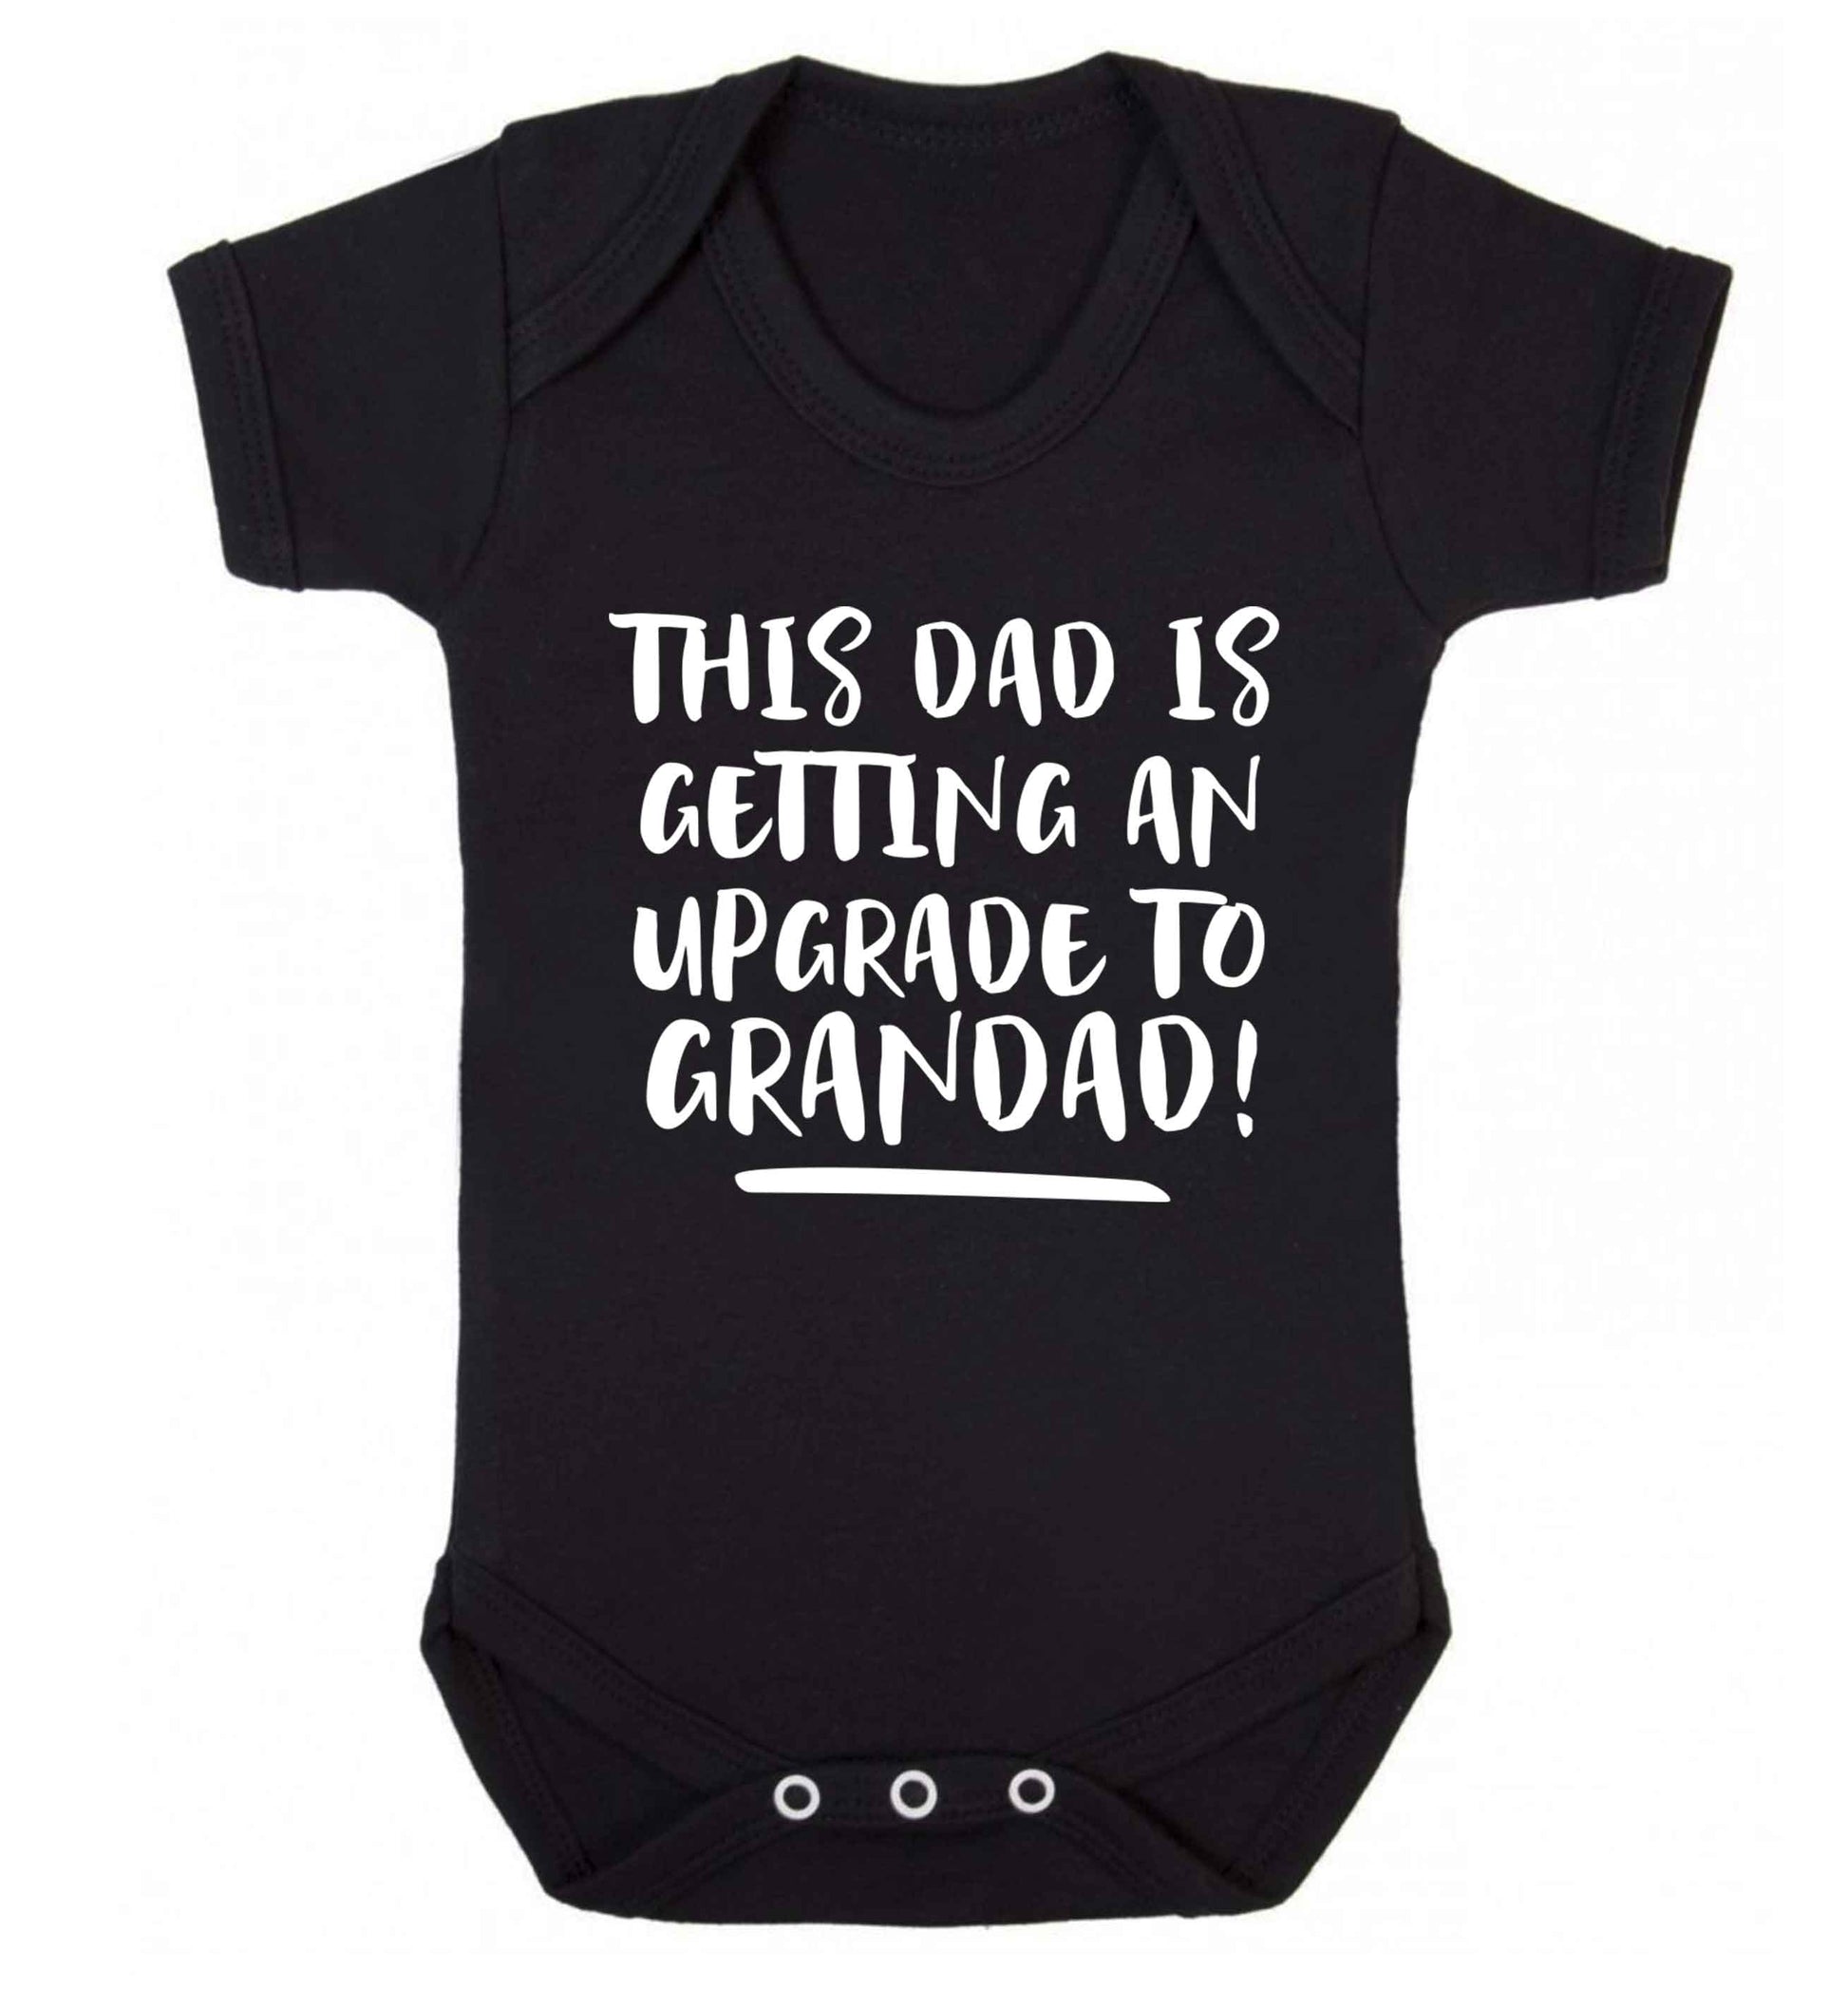 This dad is getting an upgrade to grandad! Baby Vest black 18-24 months